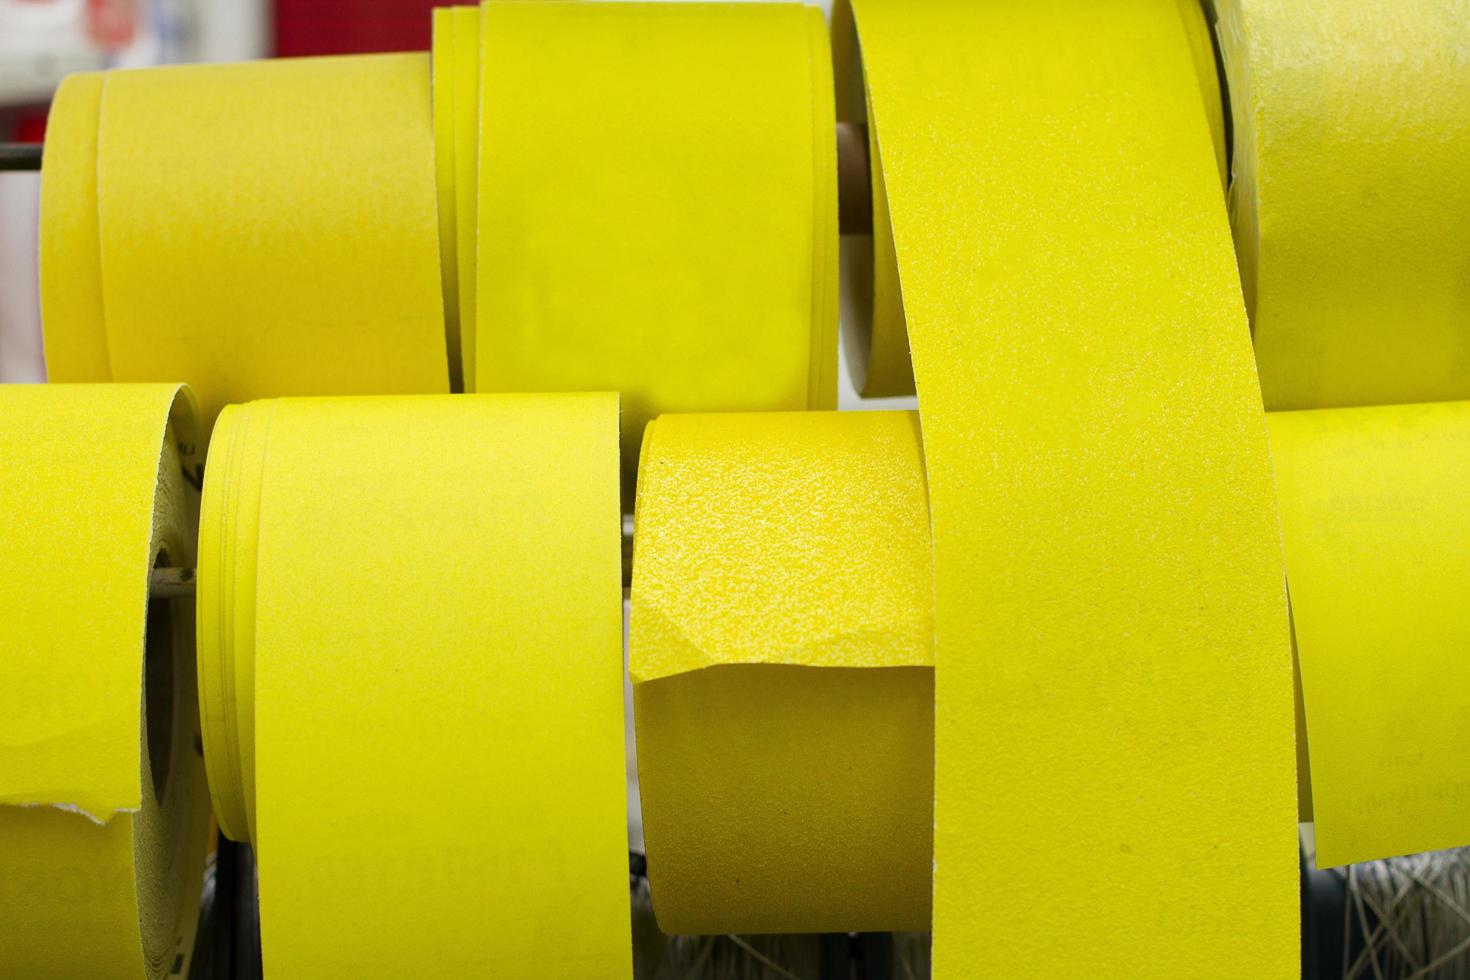 Background of adhesive yellow tape set. Selective focus. photo